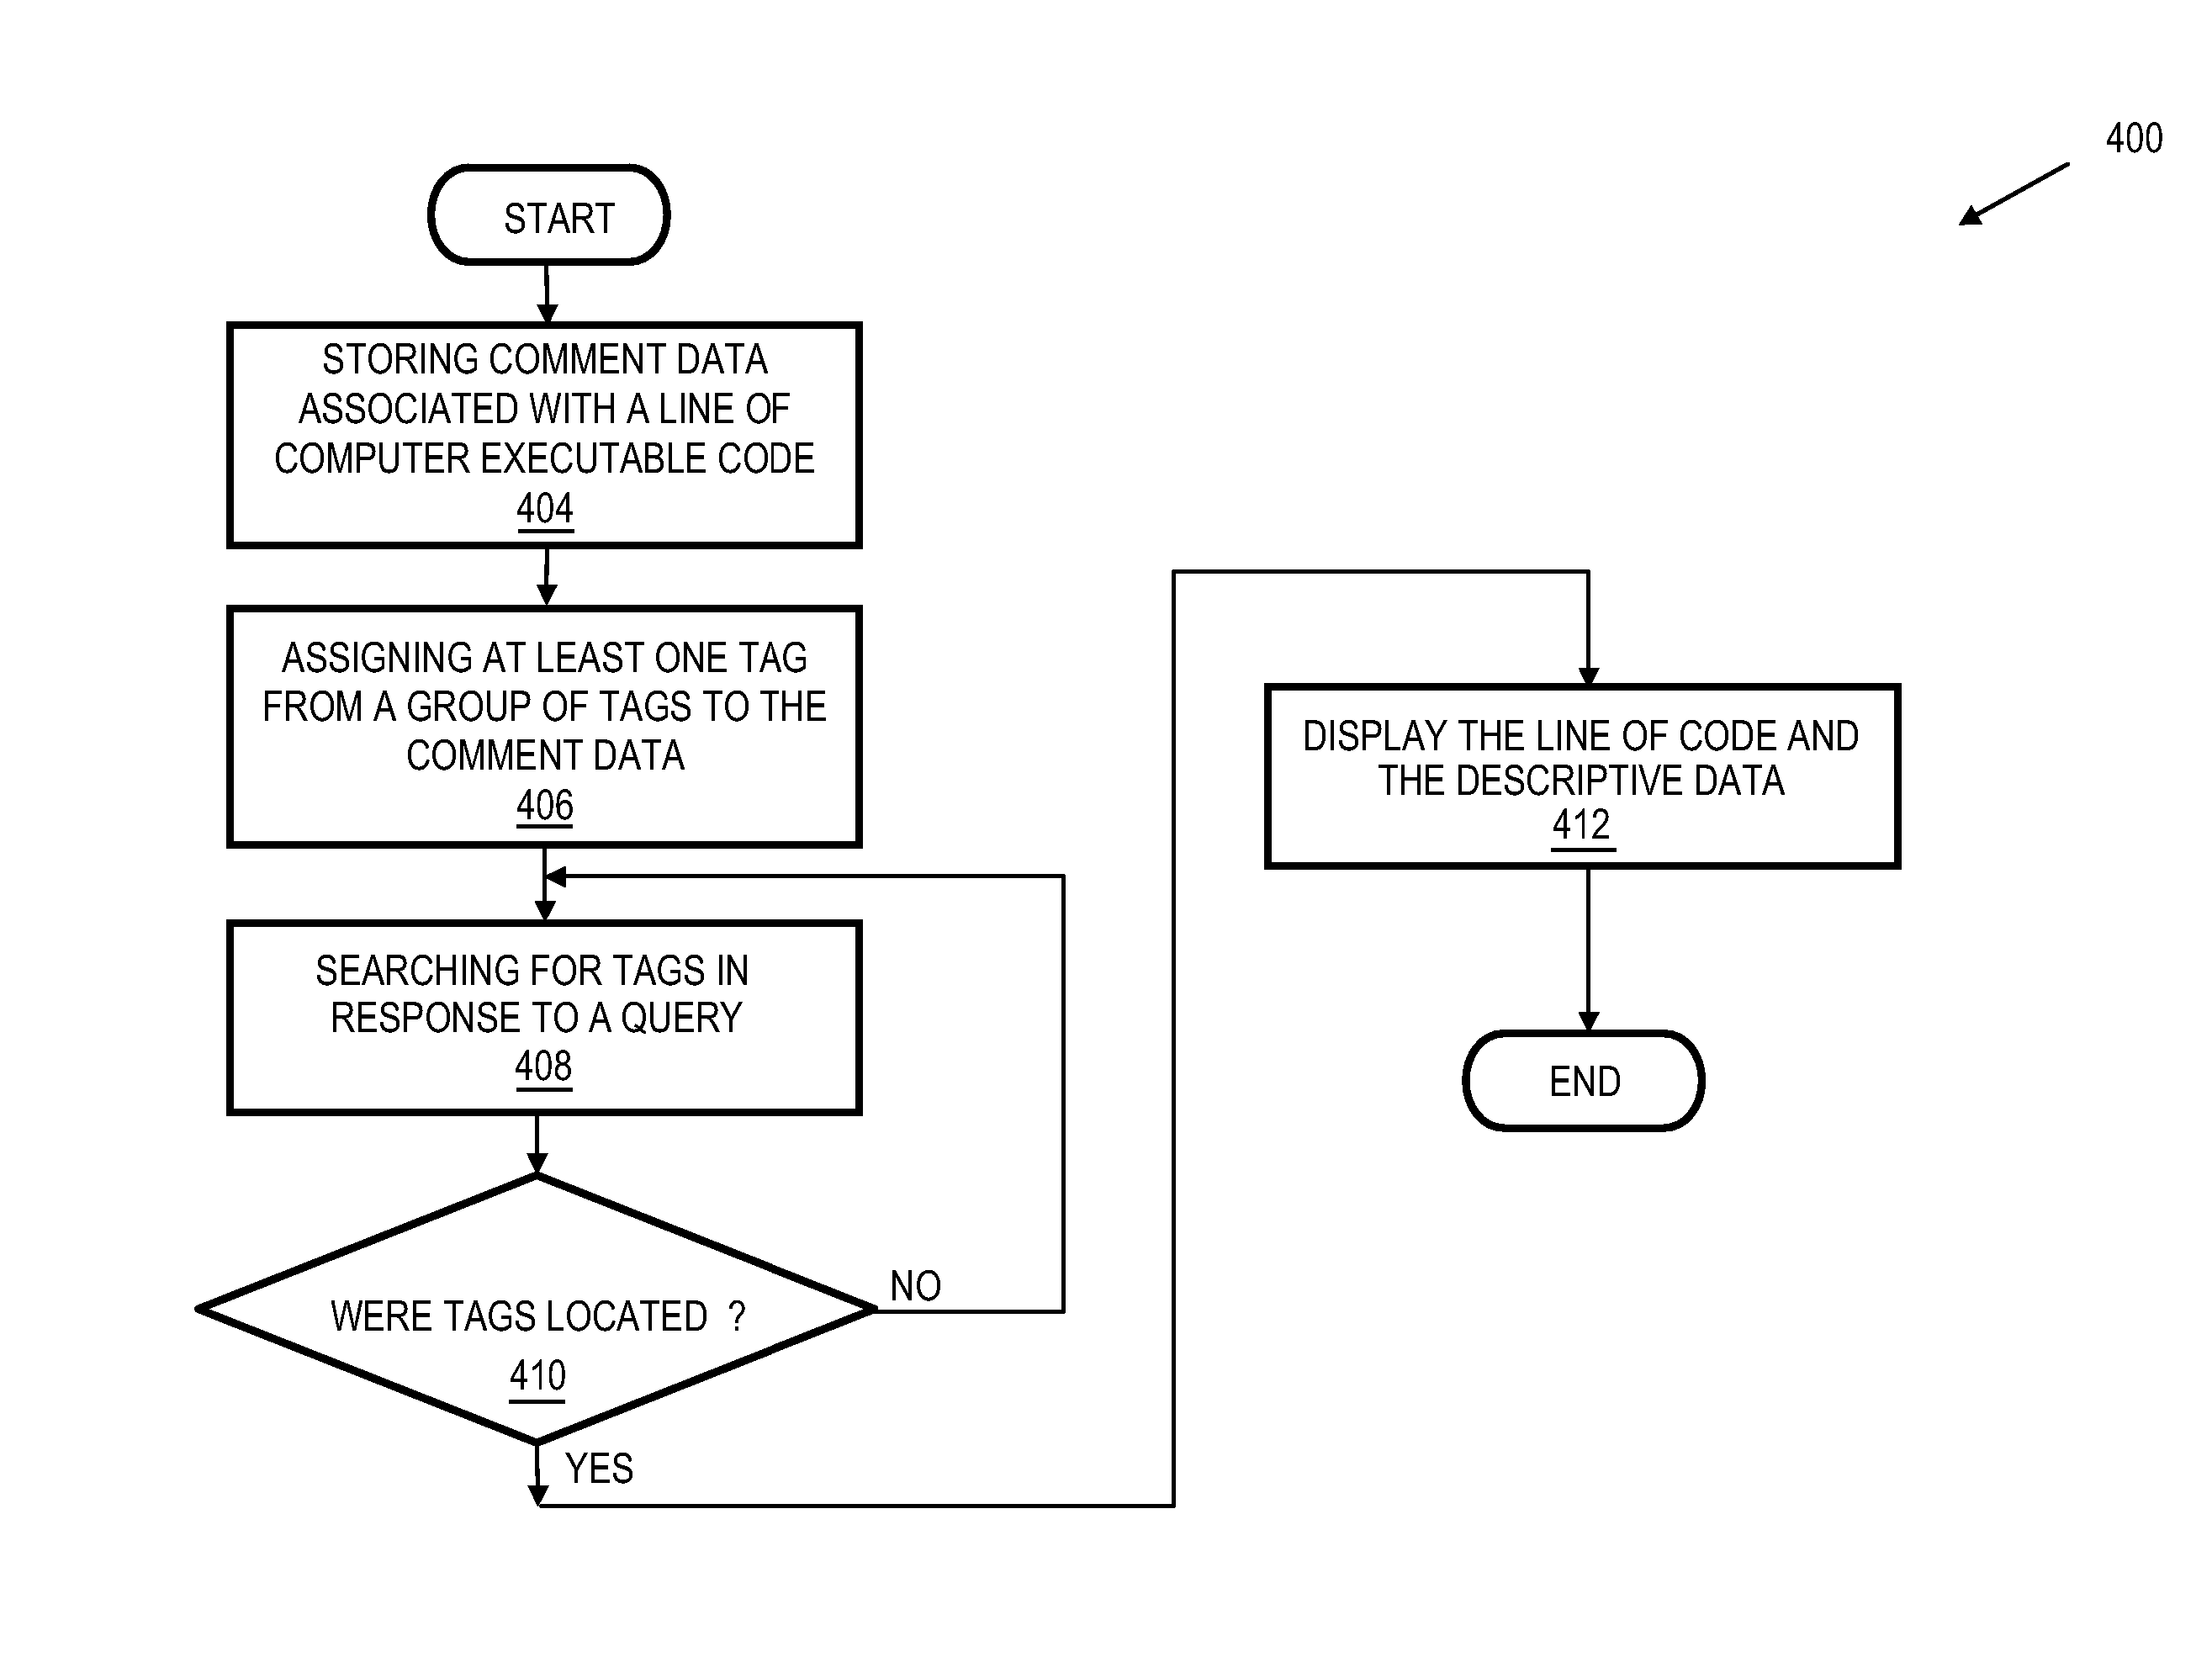 Systems and methods for managing data associated with computer code